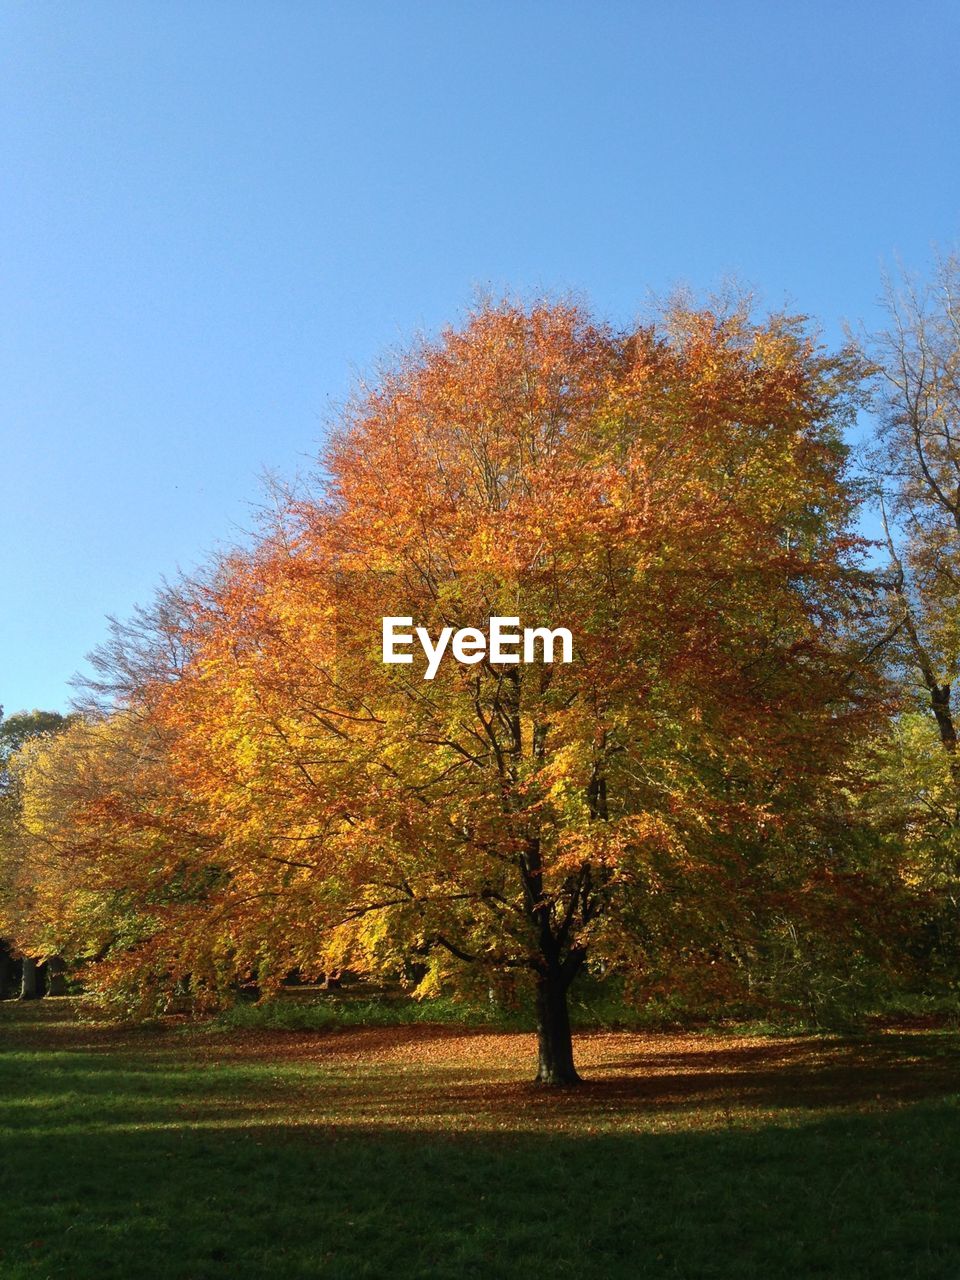 Tree in park during autumn against clear blue sky